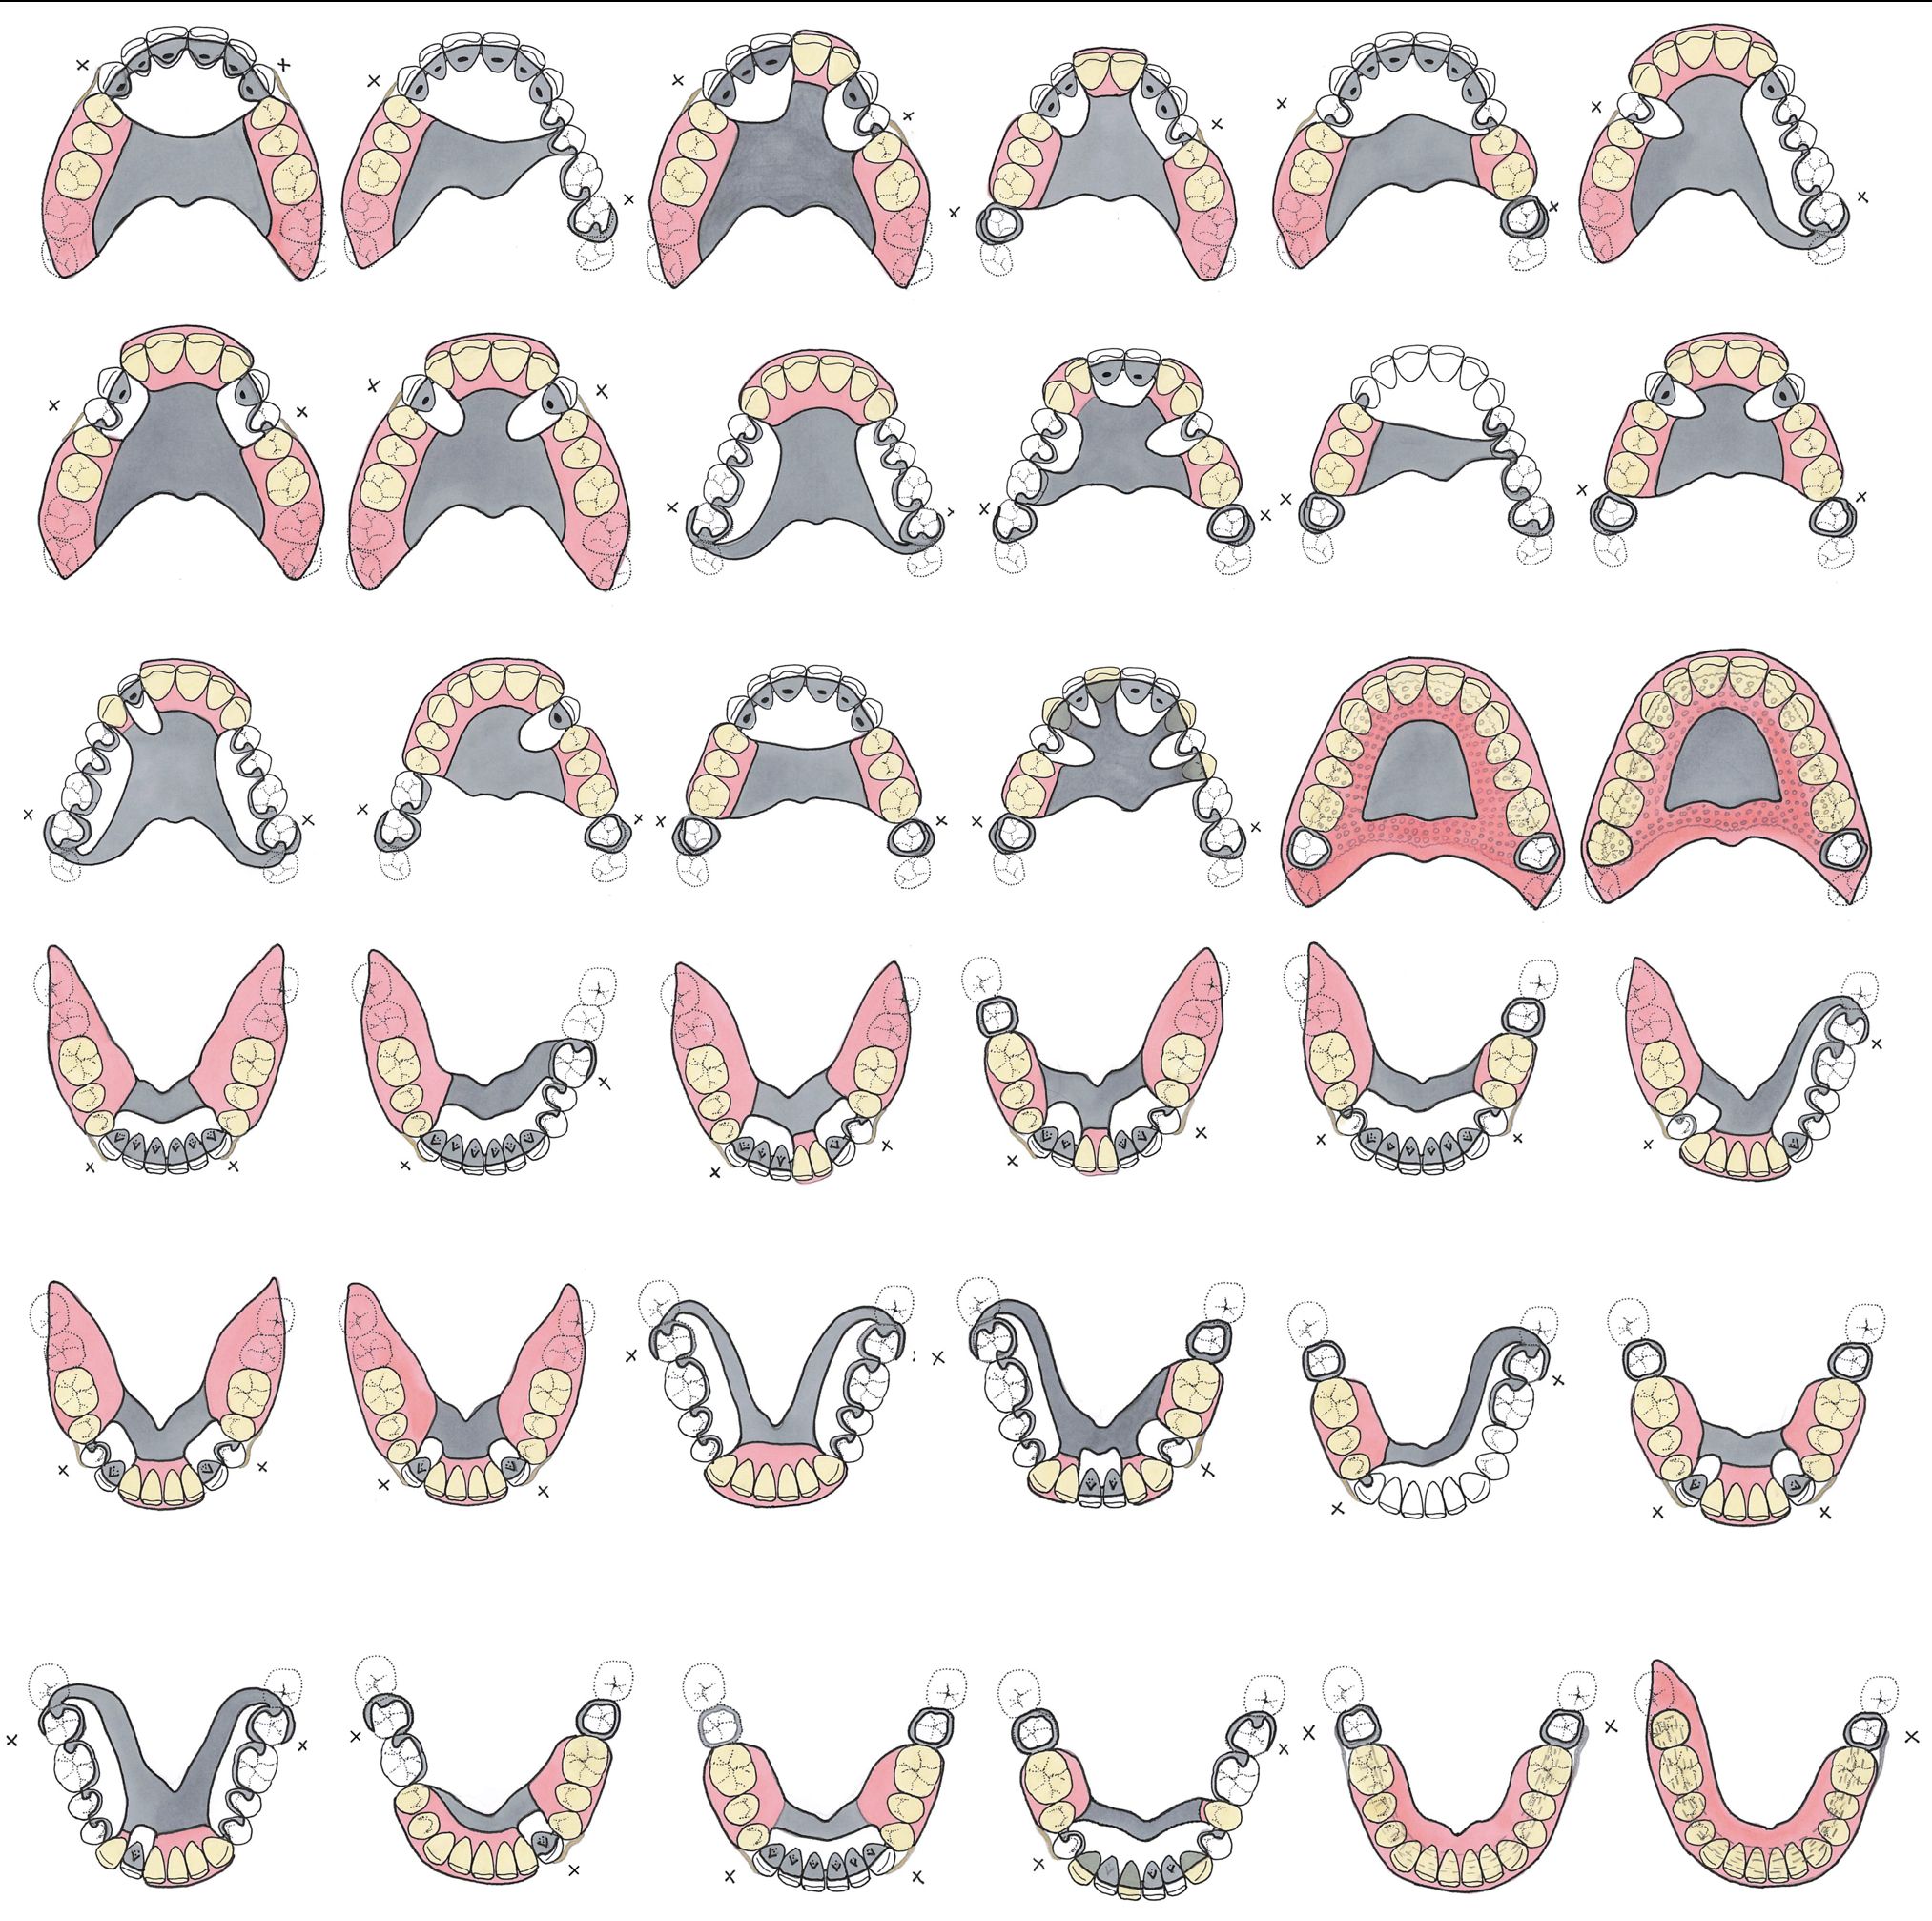 RPD designs for various combinations of missing teeth